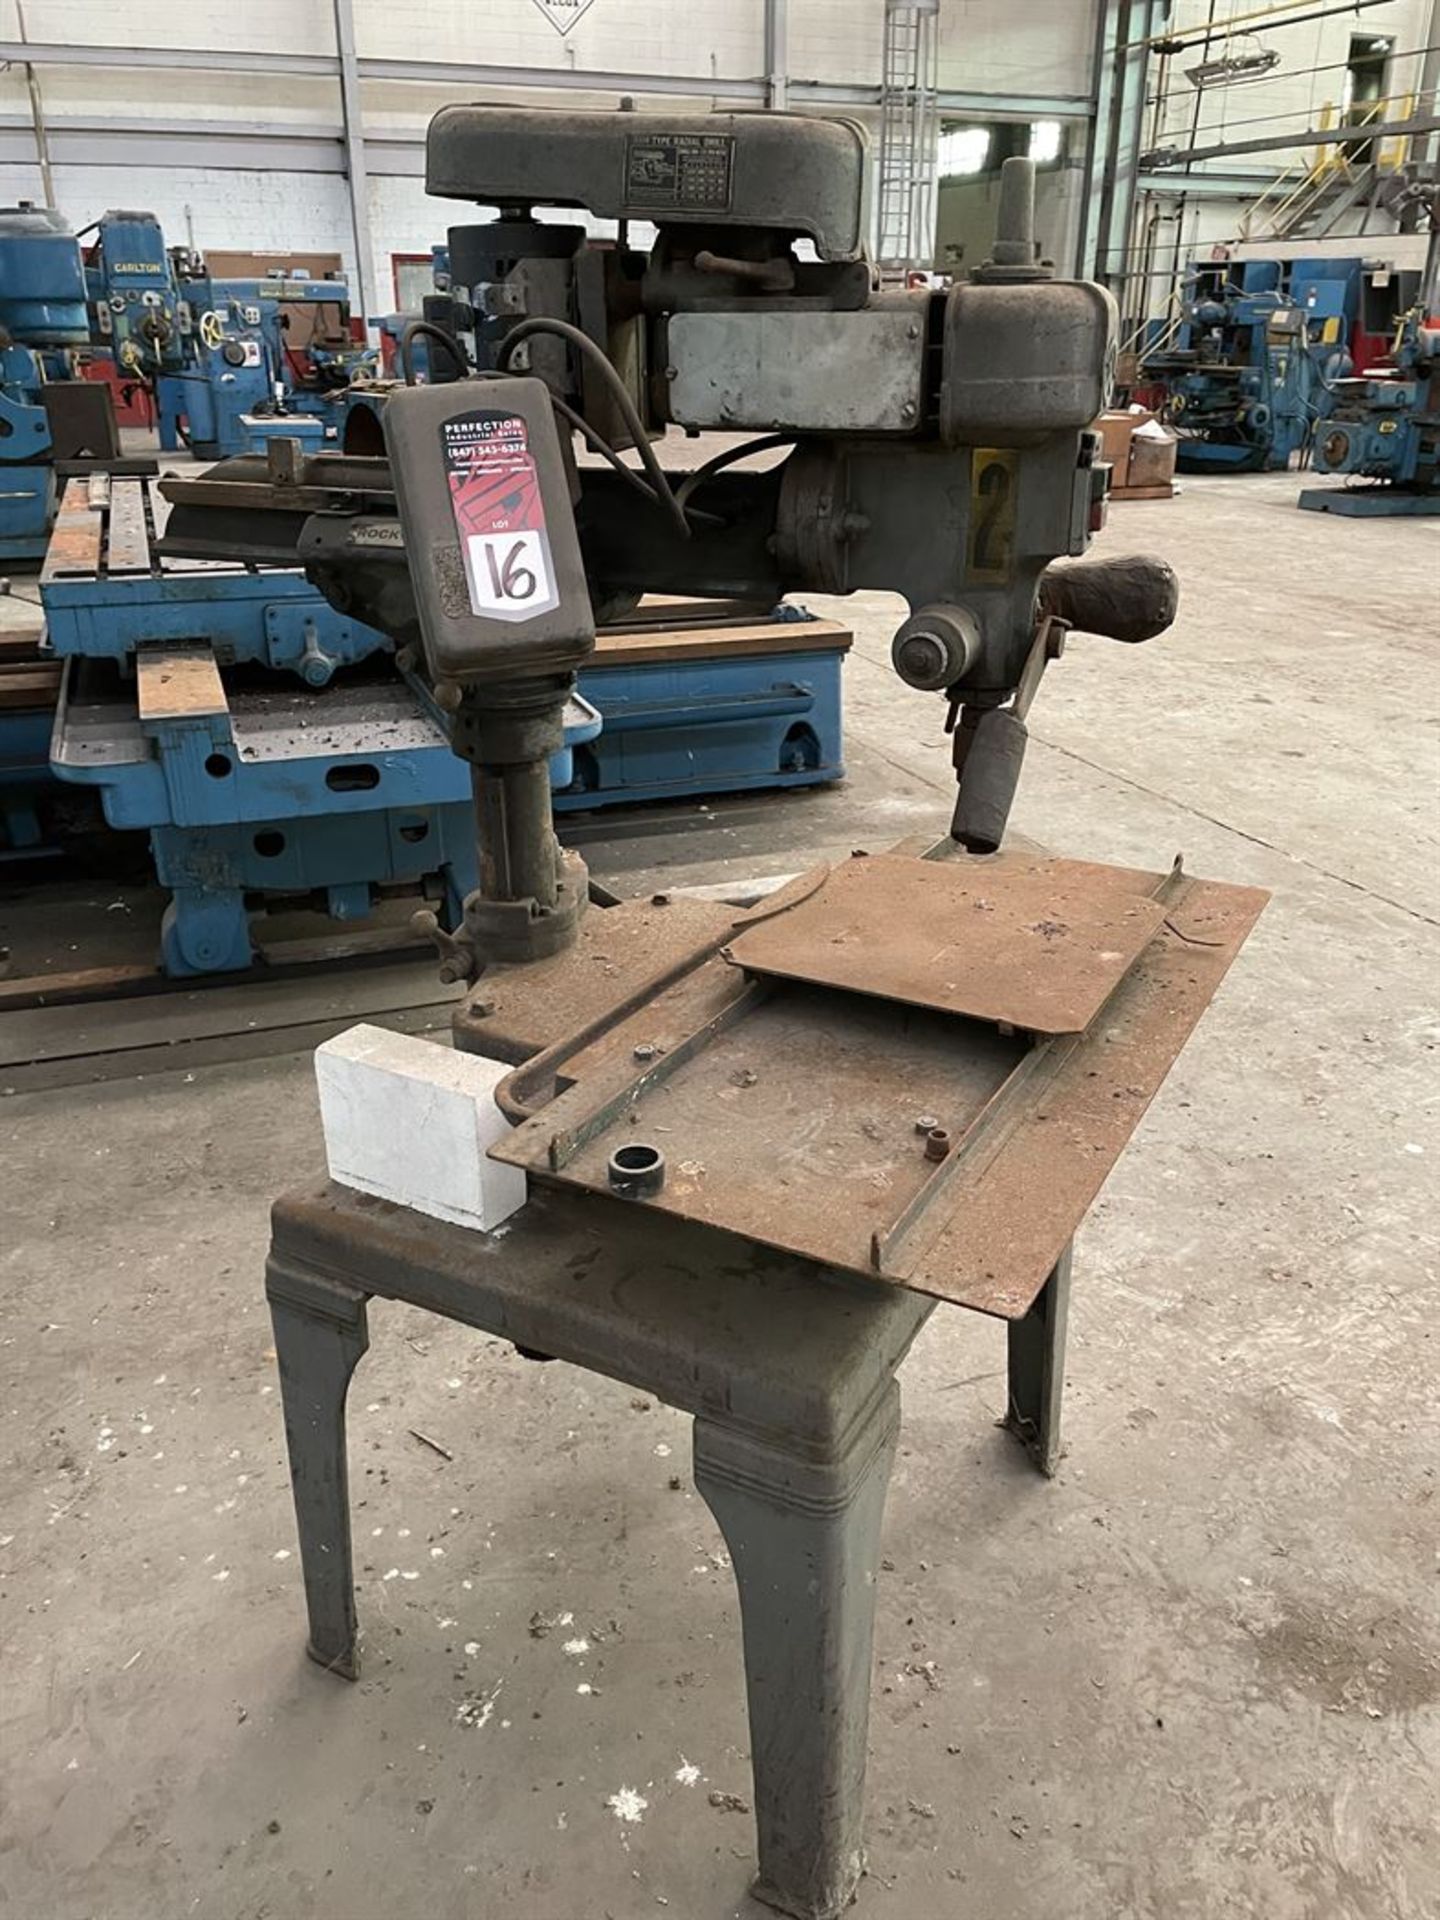 ROCKWELL 15-120 Radial Arm Drill Press, s/n 1583209, 1/2 HP, 175-8200 RPM (Condition Unknown)